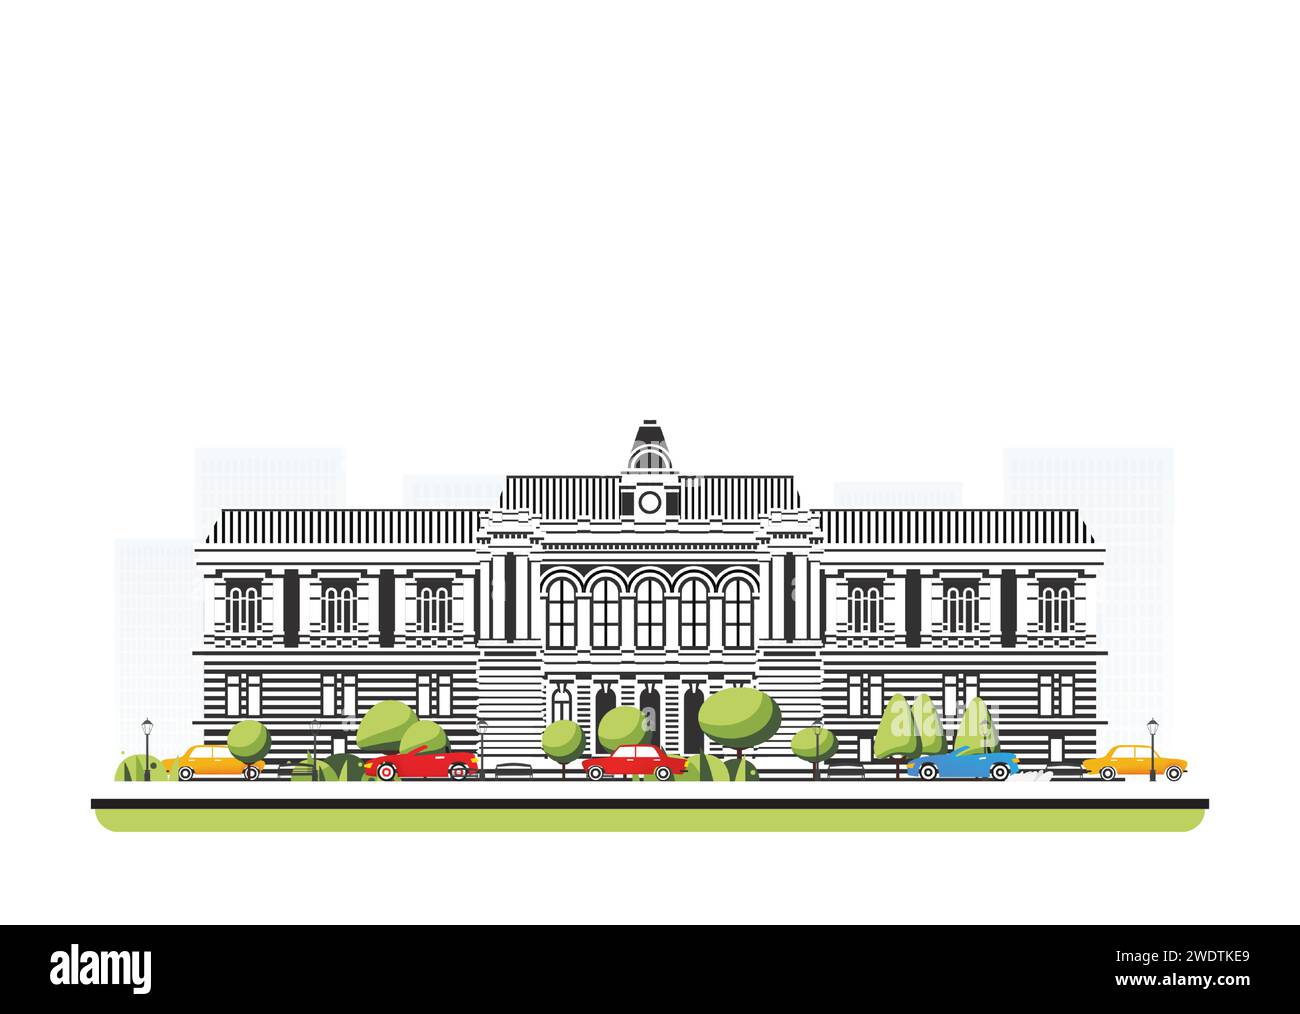 City hall building in flat style with trees and cars. Vector illustration. City scene isolated on white background. Urban architecture. Stock Vector